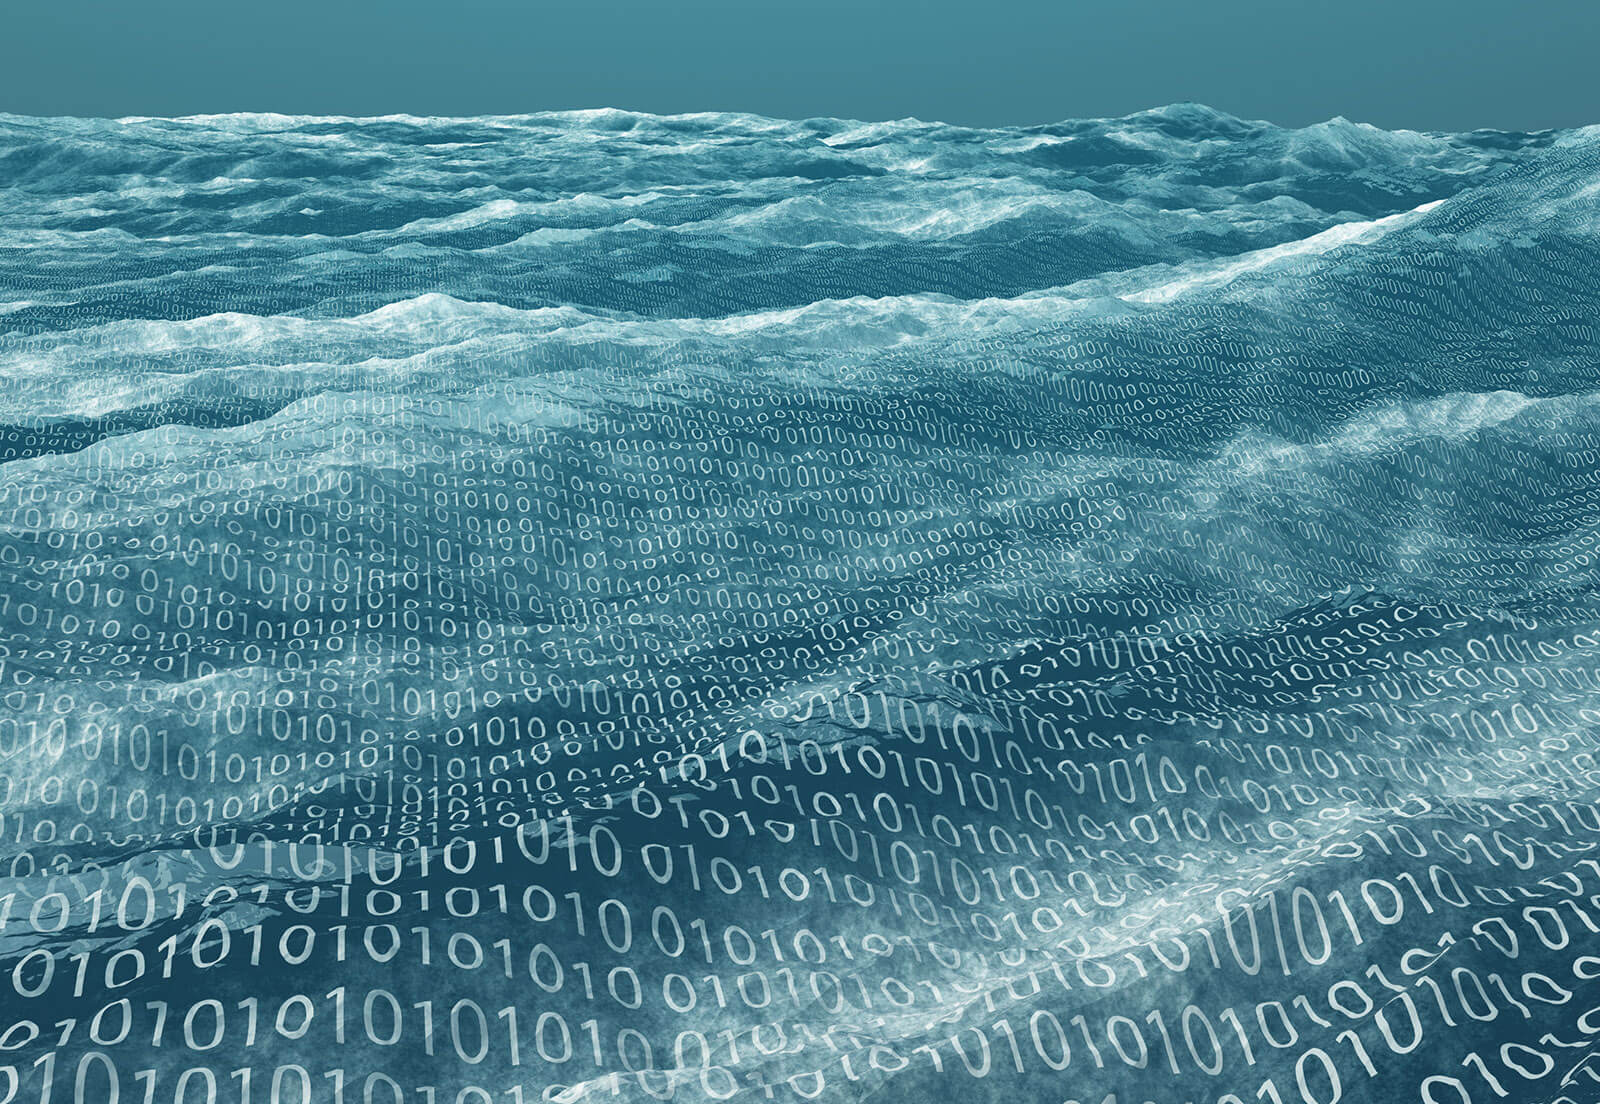 Data in waves representing a data lake